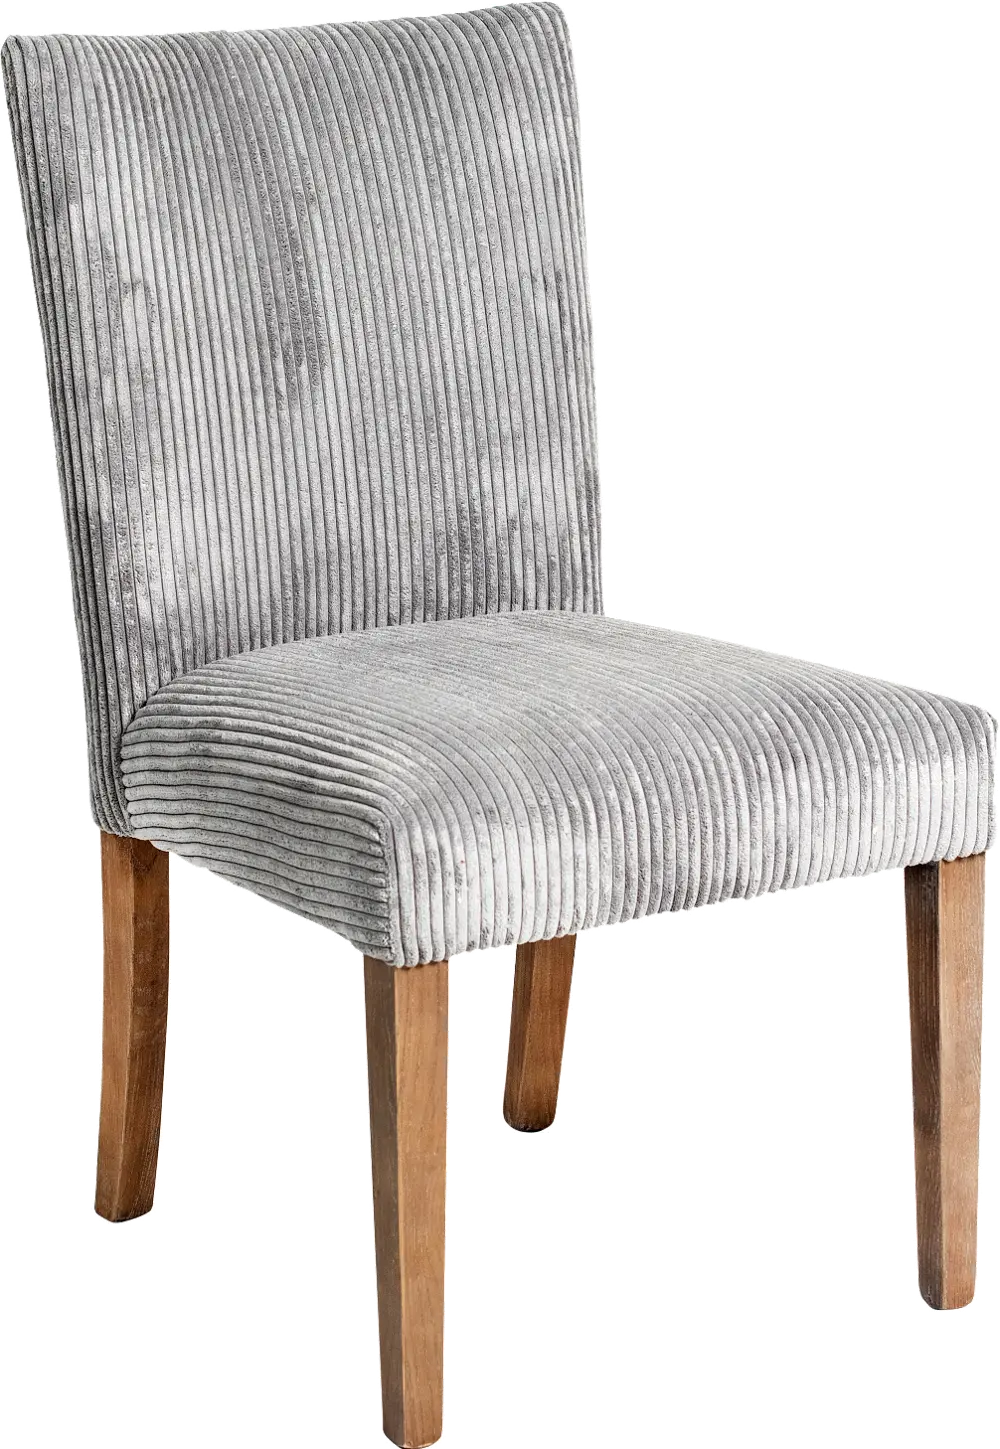 Contemporary Gray Upholstered Dining Room Chair - Sasha-1